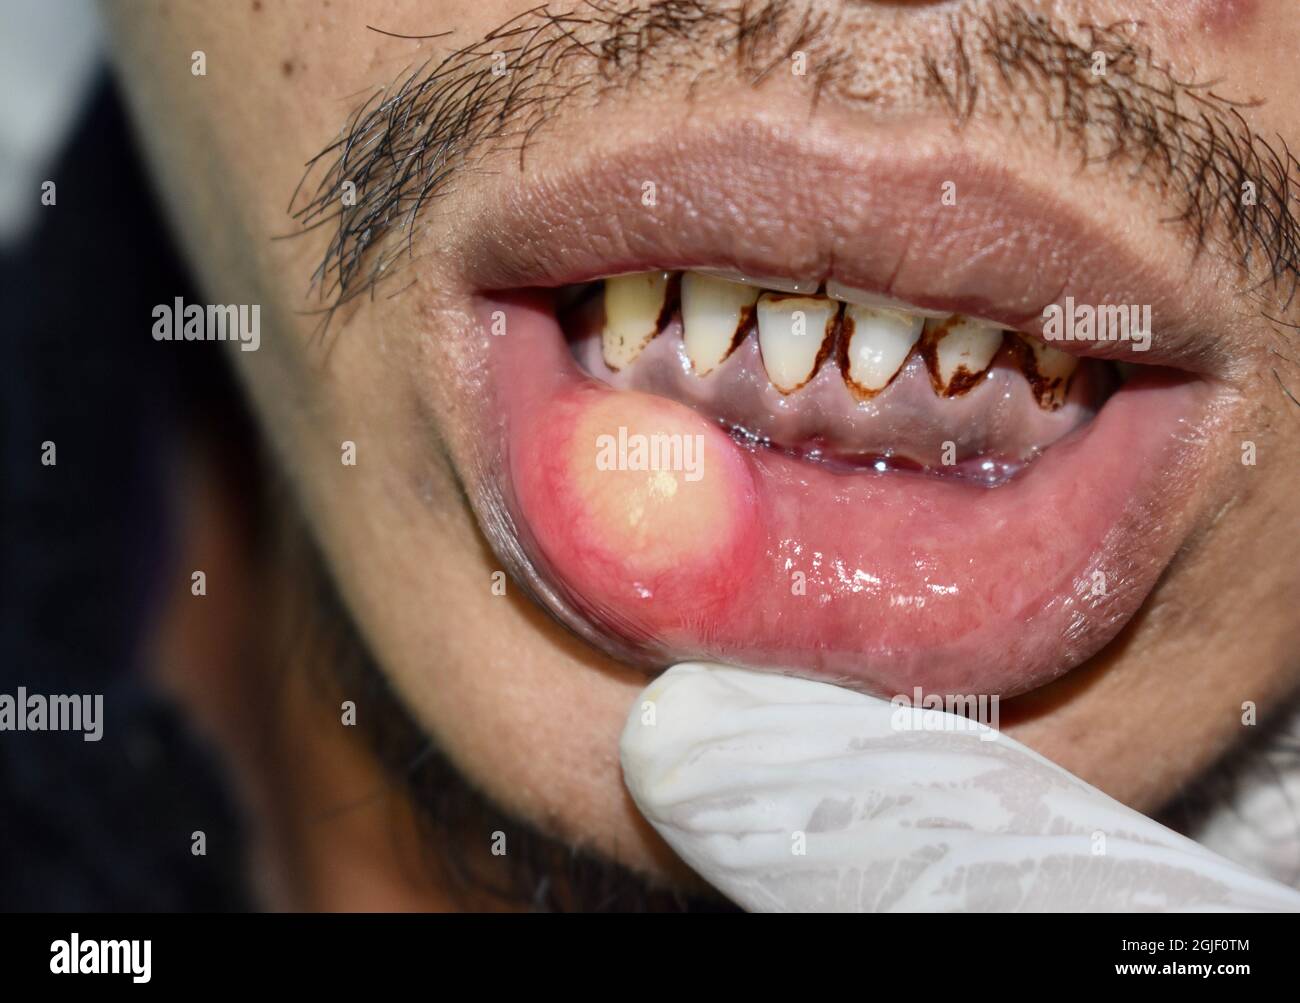 Abscess or cyst with pus at lower lip of Asian man. Stock Photo